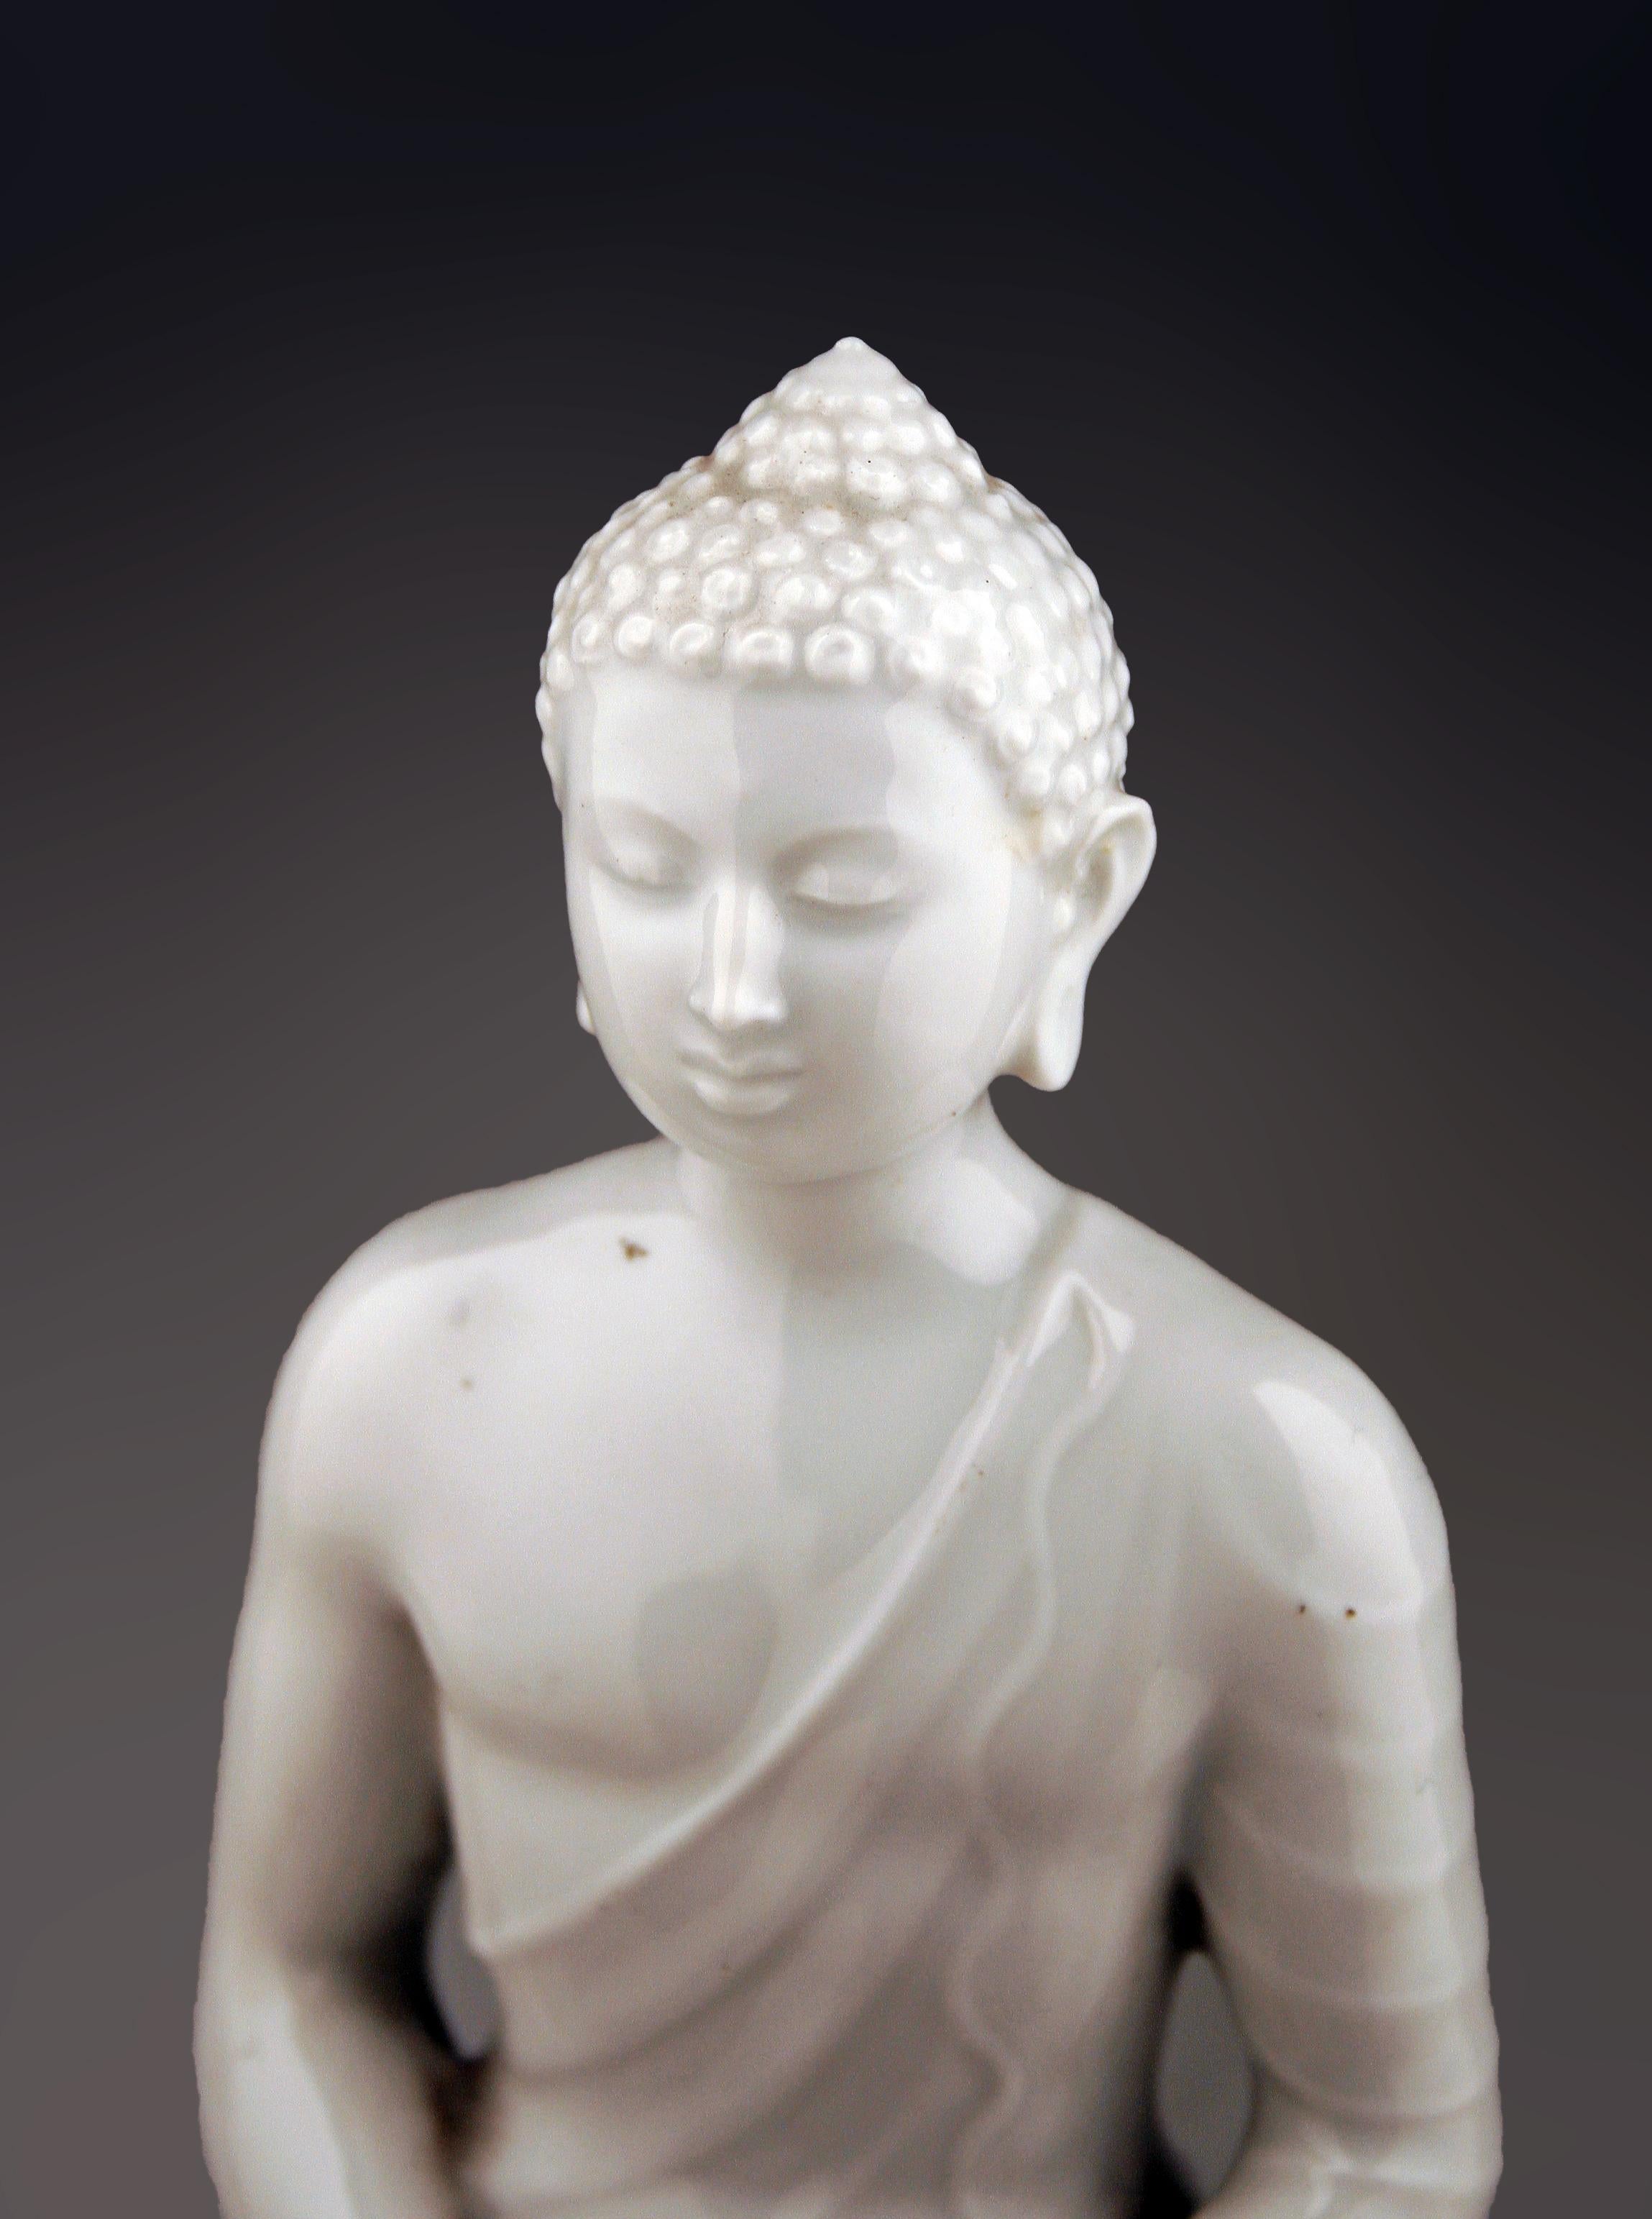 Art Déco German Glazed Porcelain Sculpture of a Sitting Buddha by Rosenthal In Good Condition For Sale In North Miami, FL